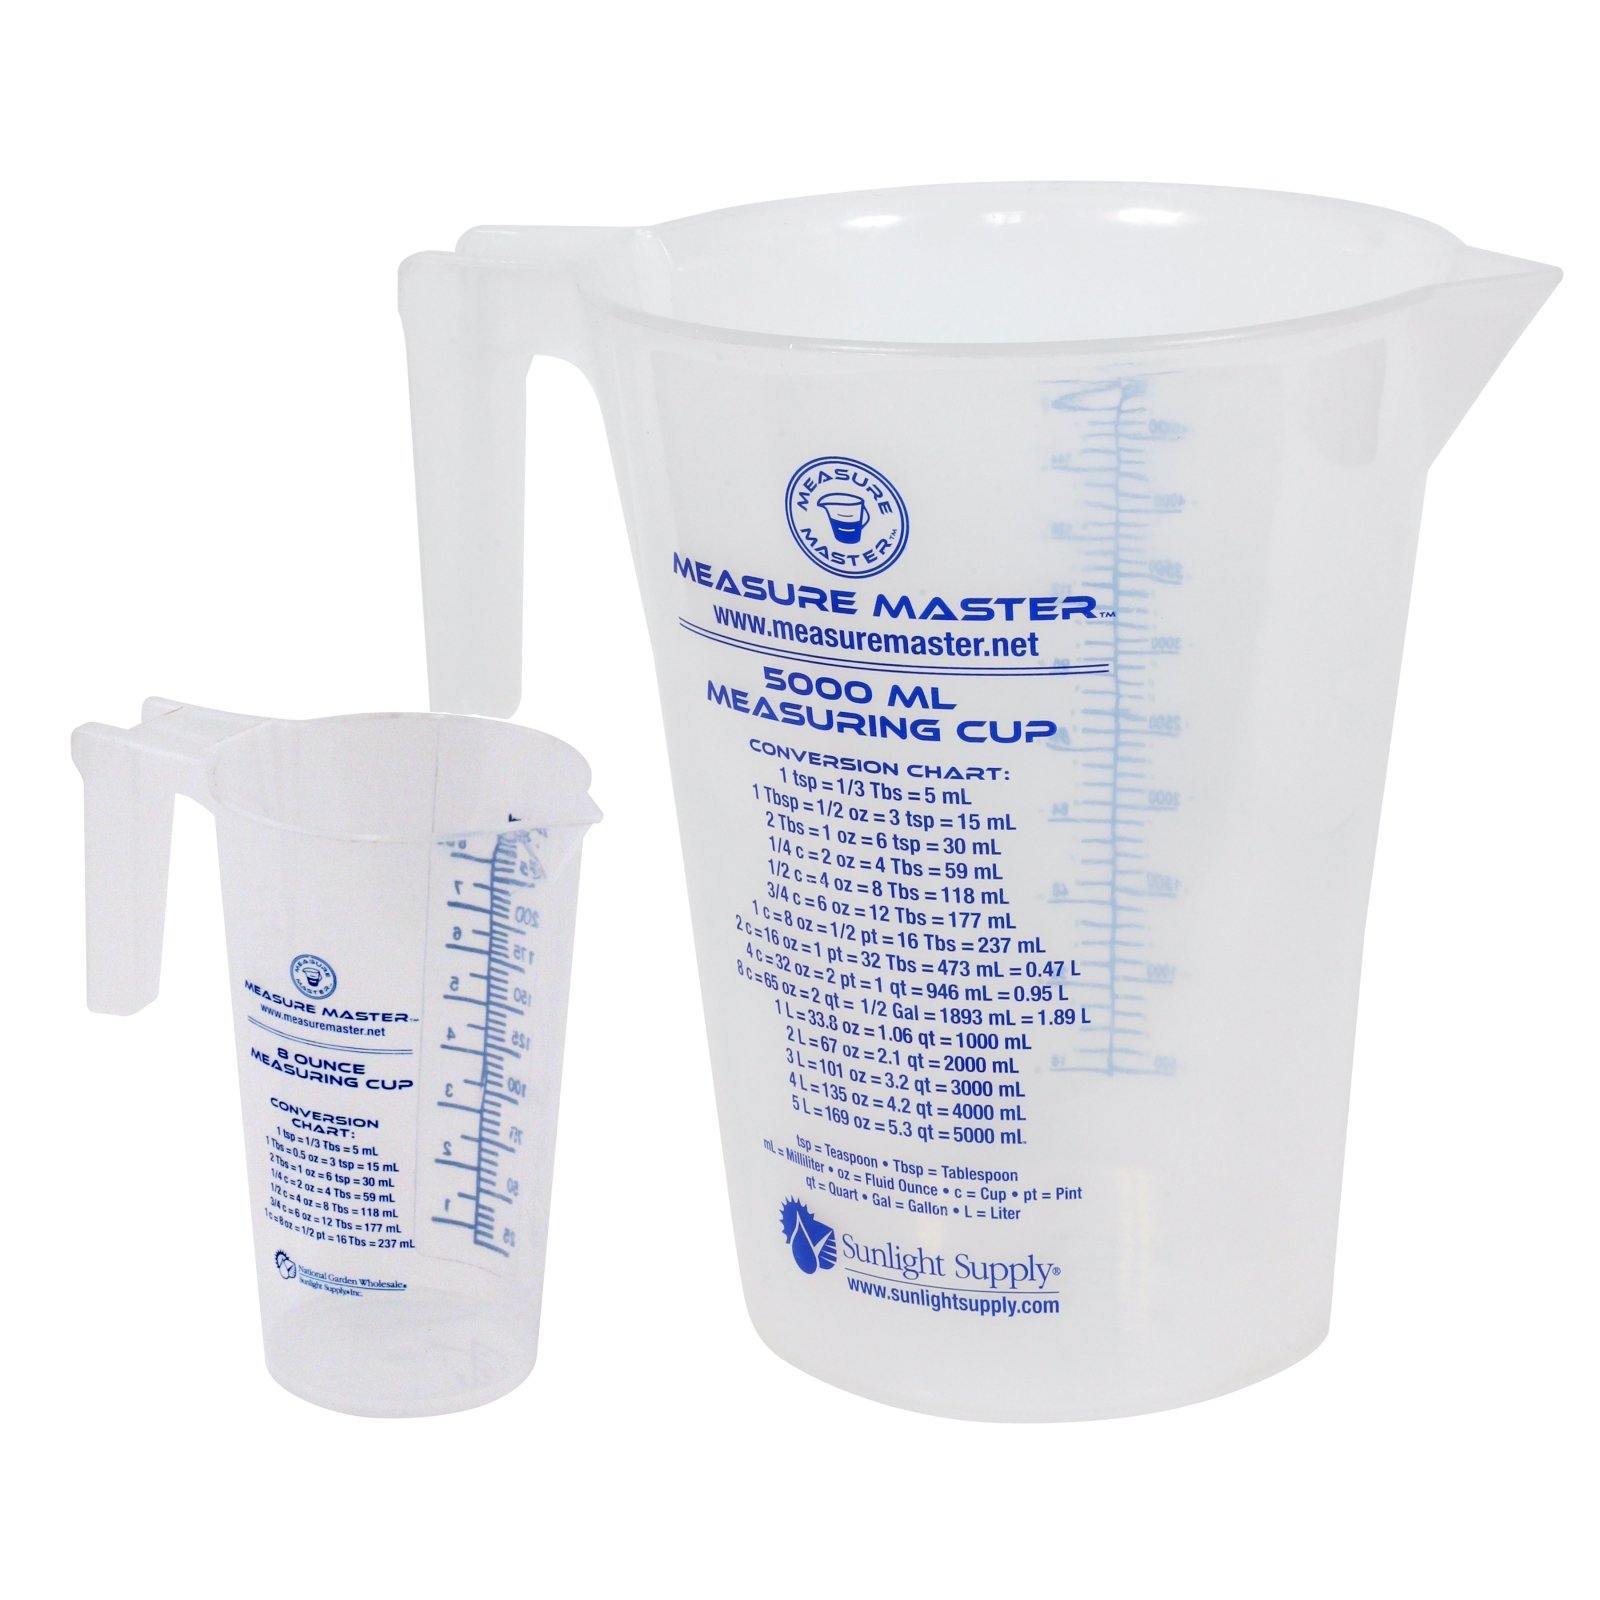 2 Cup Plastic Measuring Cup With Metric Equivalents